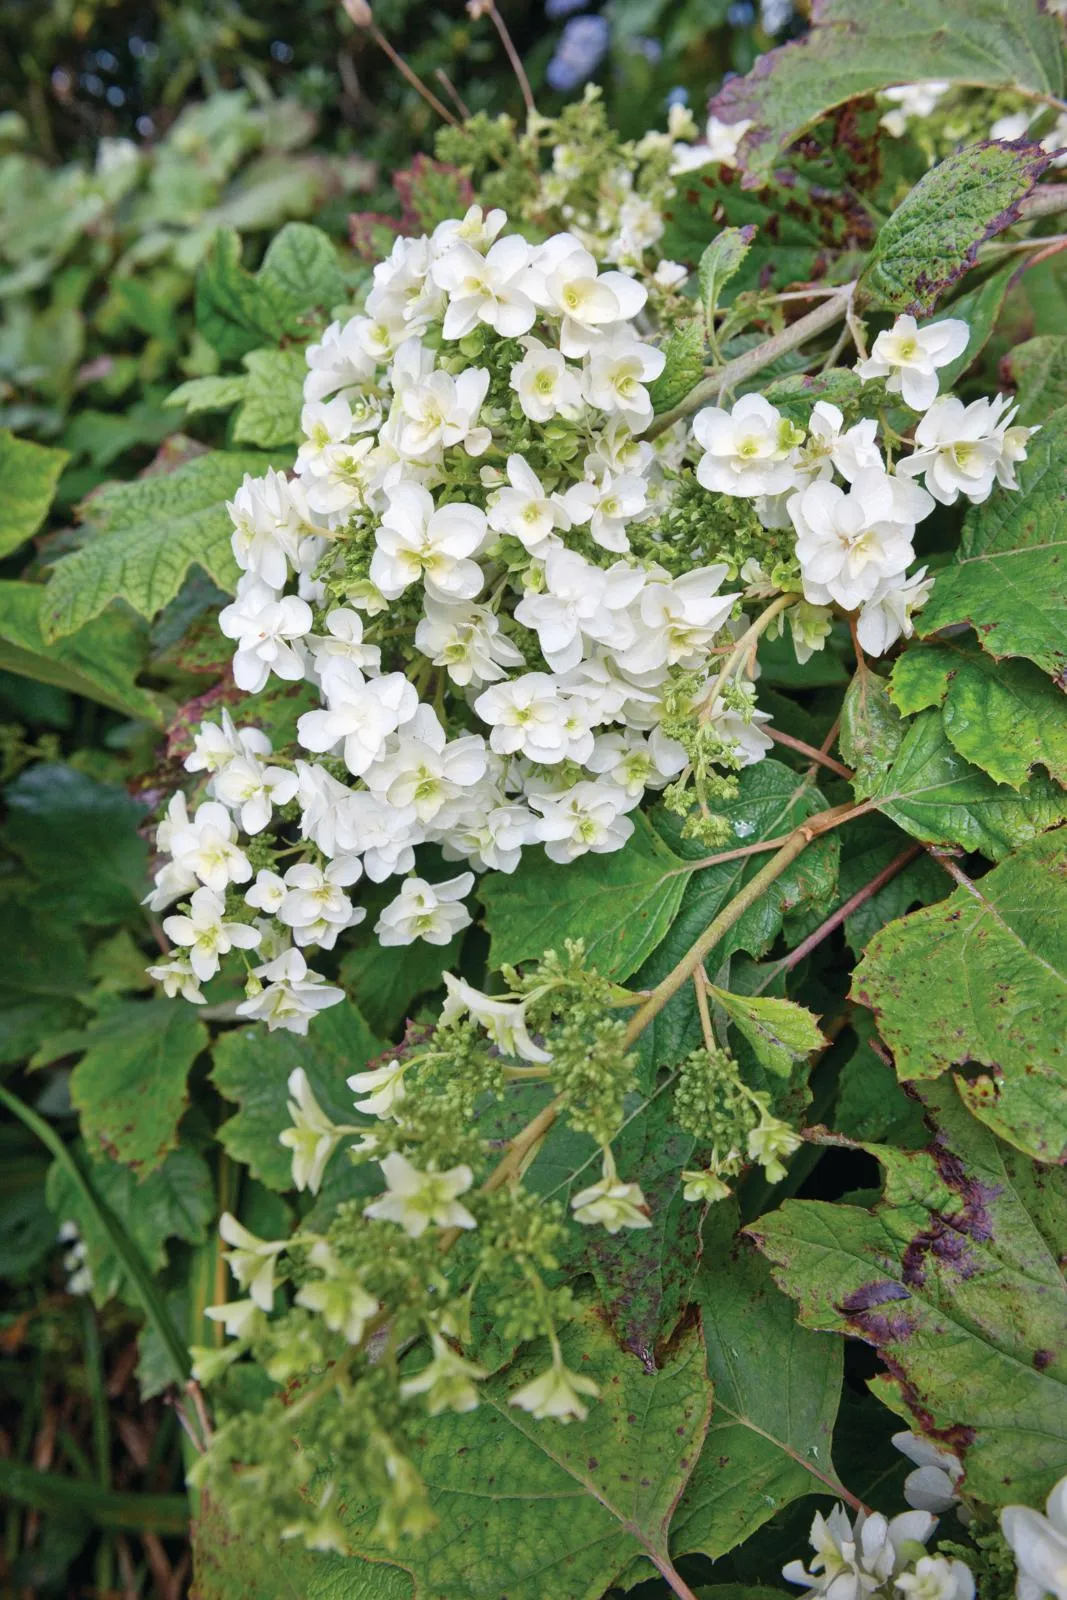 Hydrangea quercifolia Snowflake (= ‘Brido’) with arching branches carry large, conical heads of double, sterile florets, opening creamy-white, blushing pink.